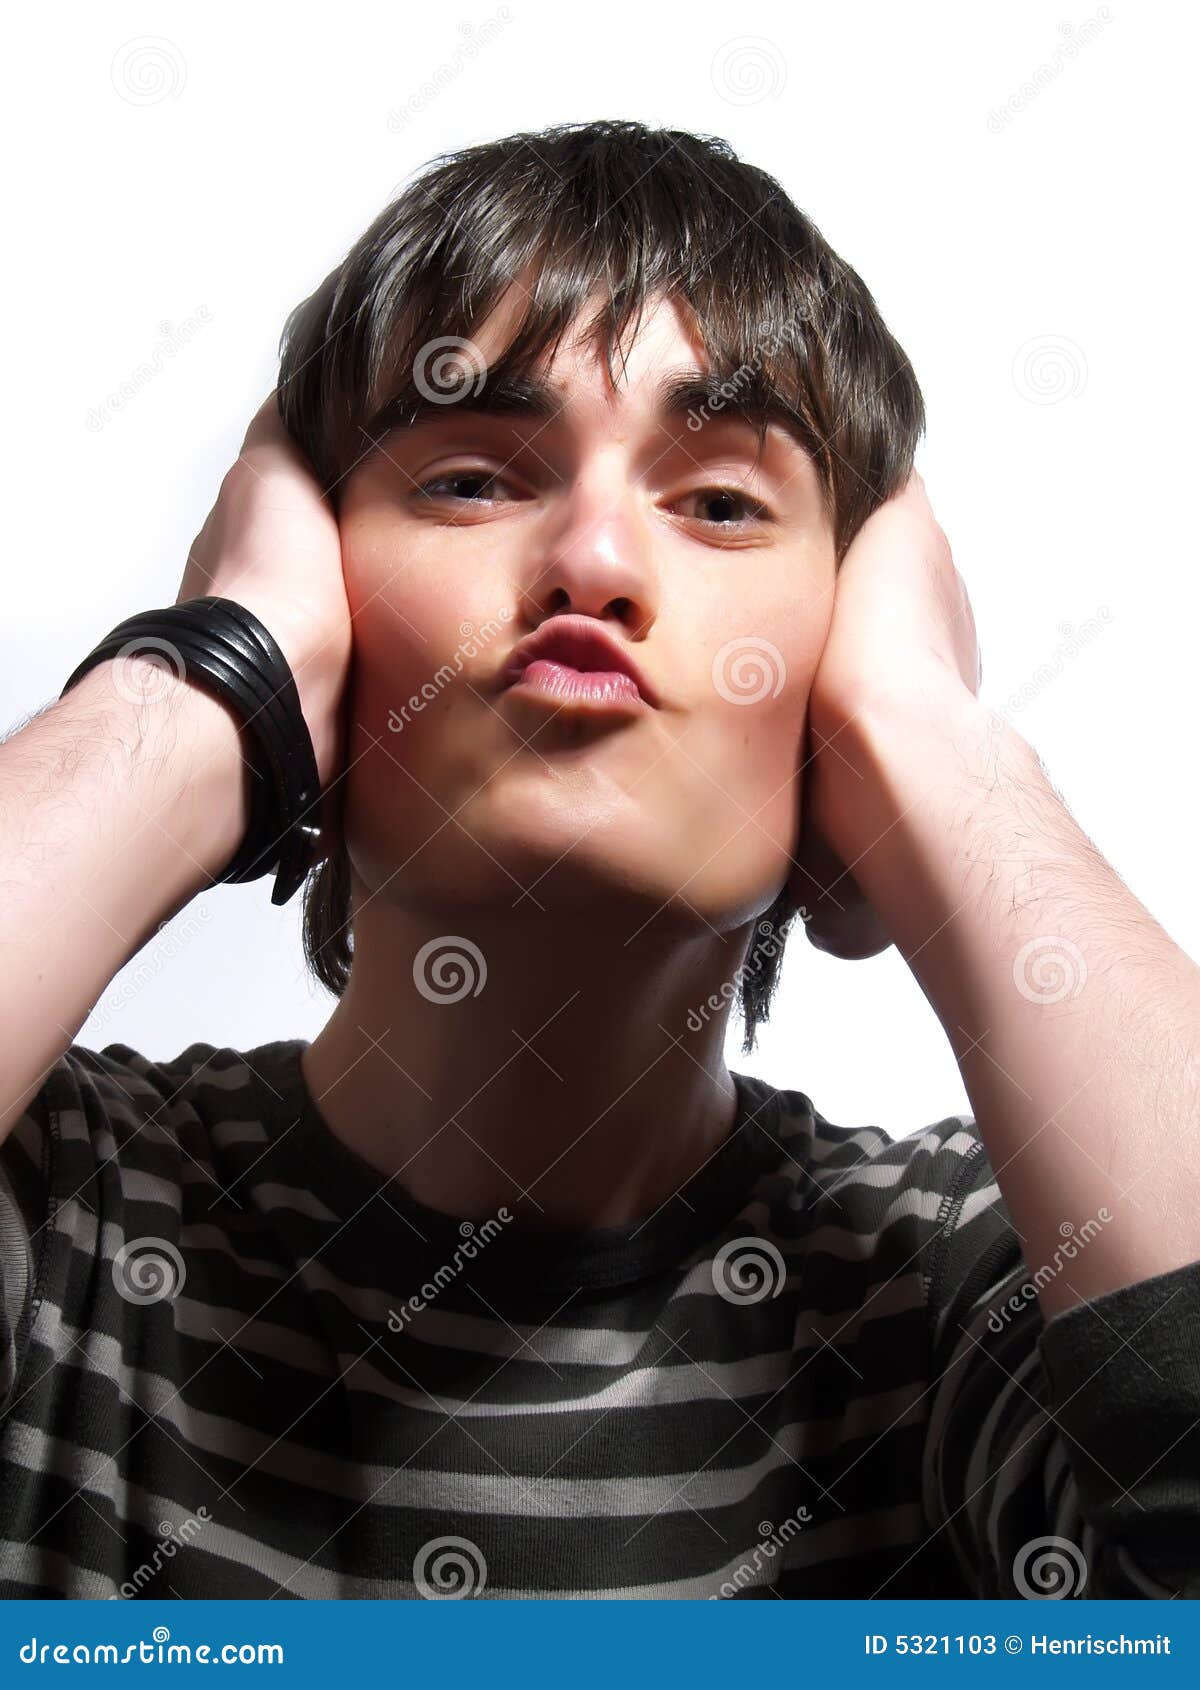 Not listening but kissing stock image. Image of hair, beautiful - 5321103